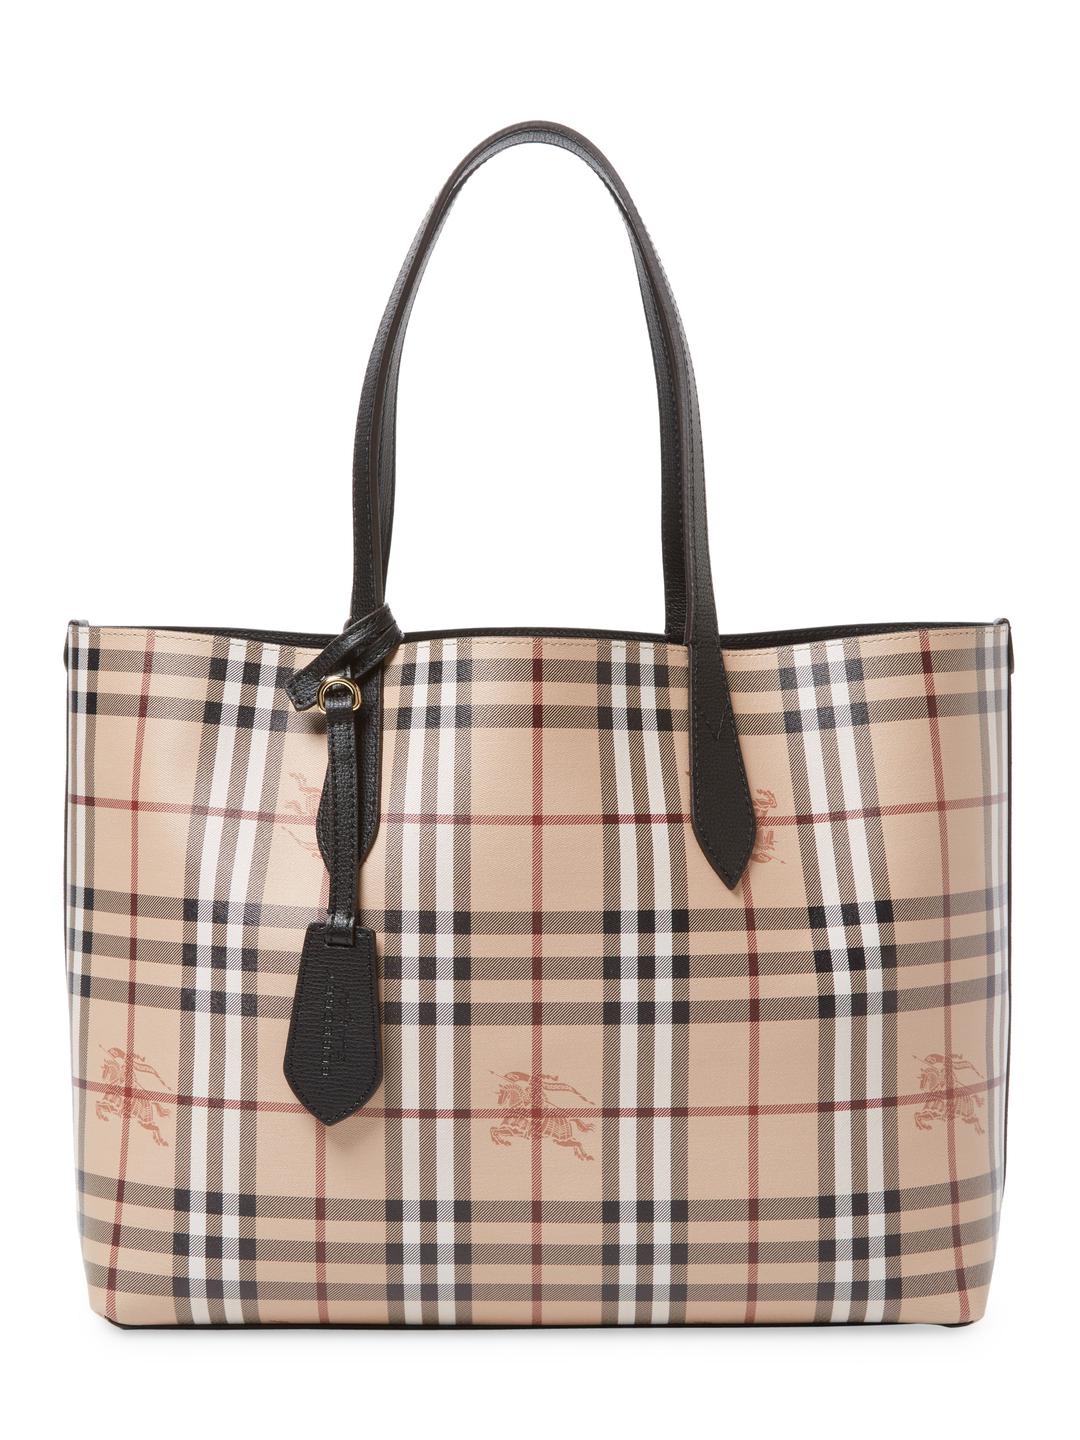 Burberry Leather Plaid Tote Bag in Black | Lyst